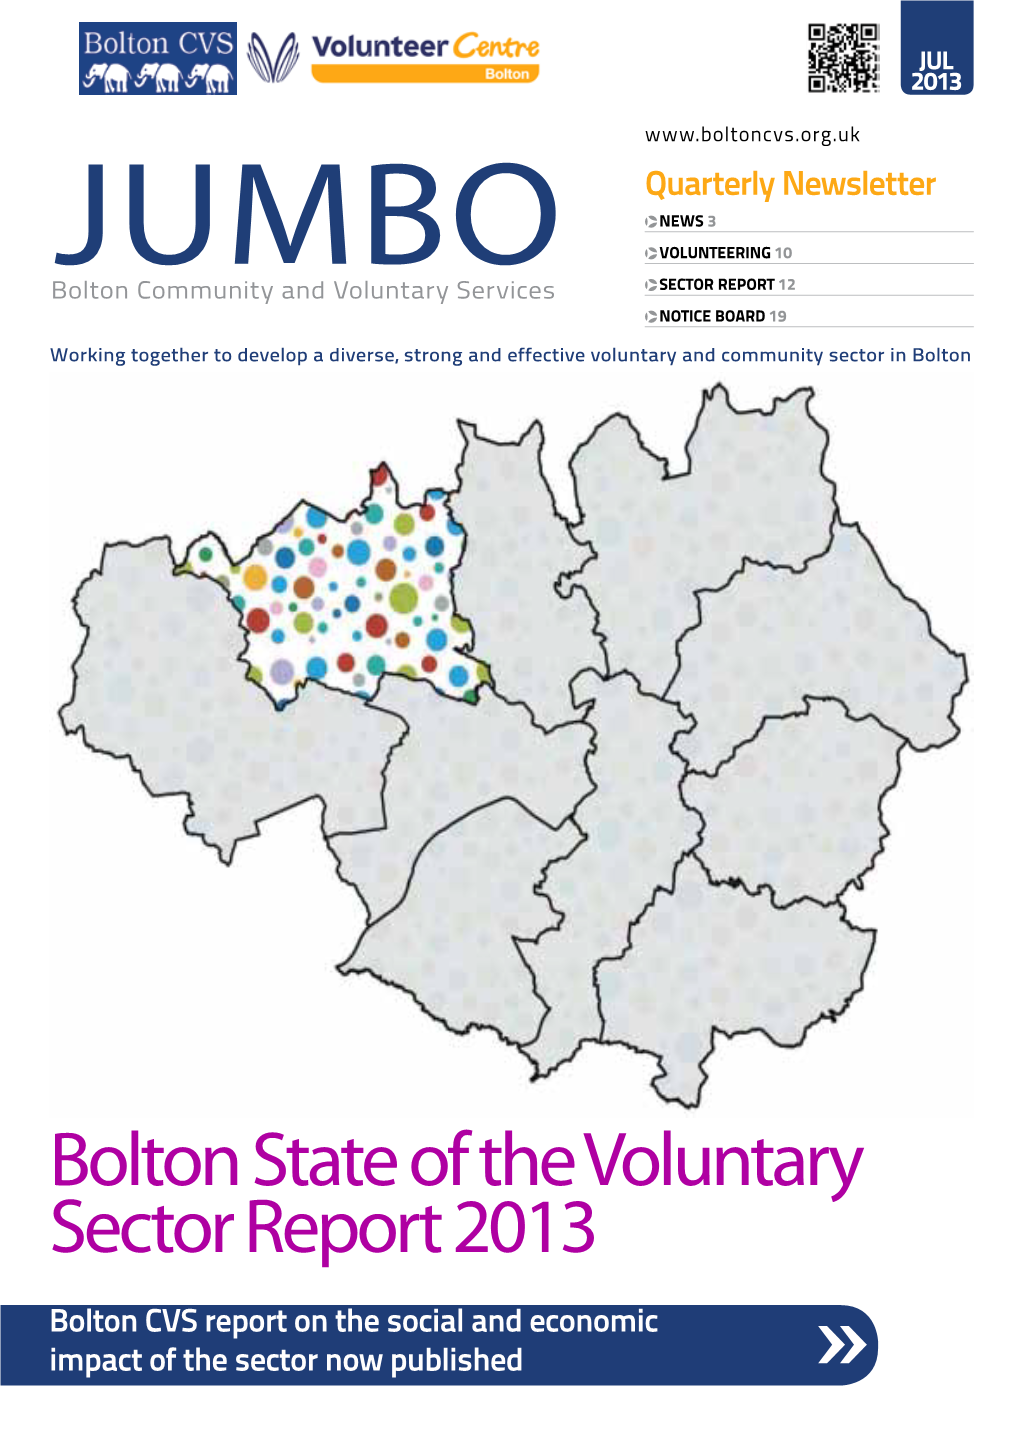 Bolton State of the Voluntary Sector Report 2013